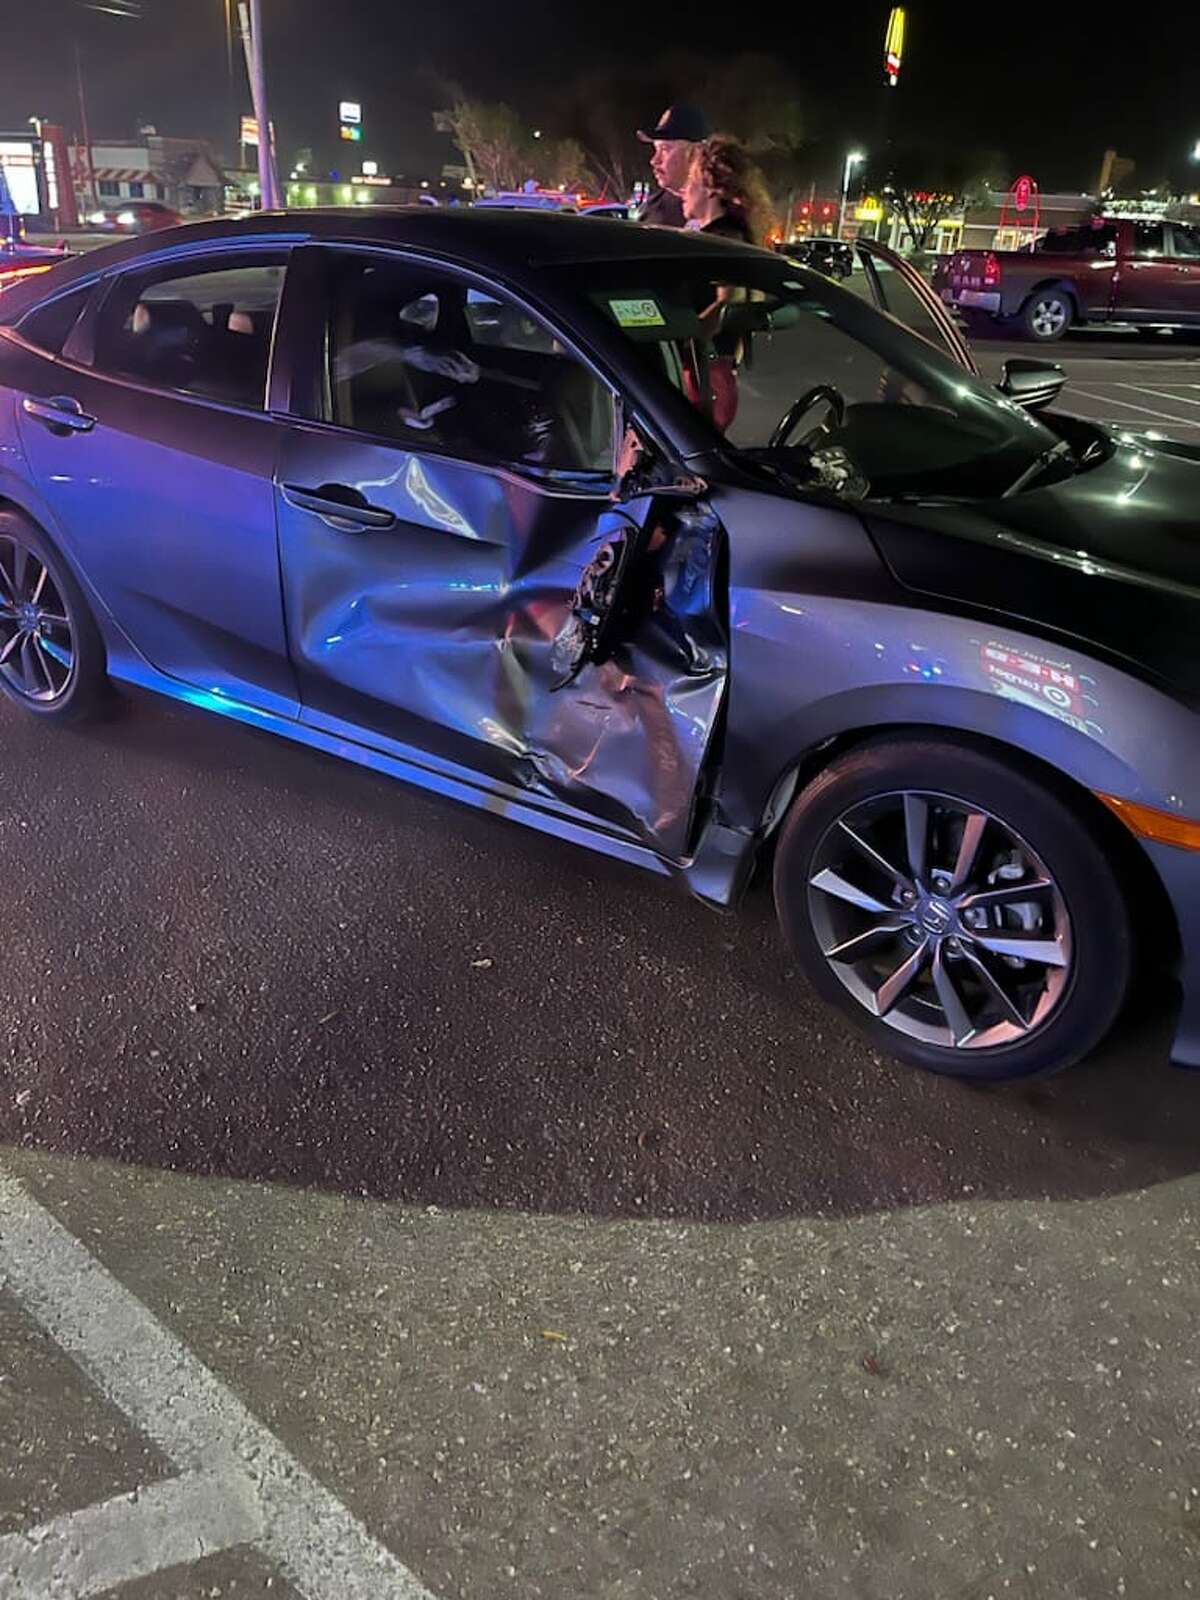 A 14-year-old male was taken to the hospital after crashing into this car in the 200 block of Del Mar Boulevard on Feb. 21.